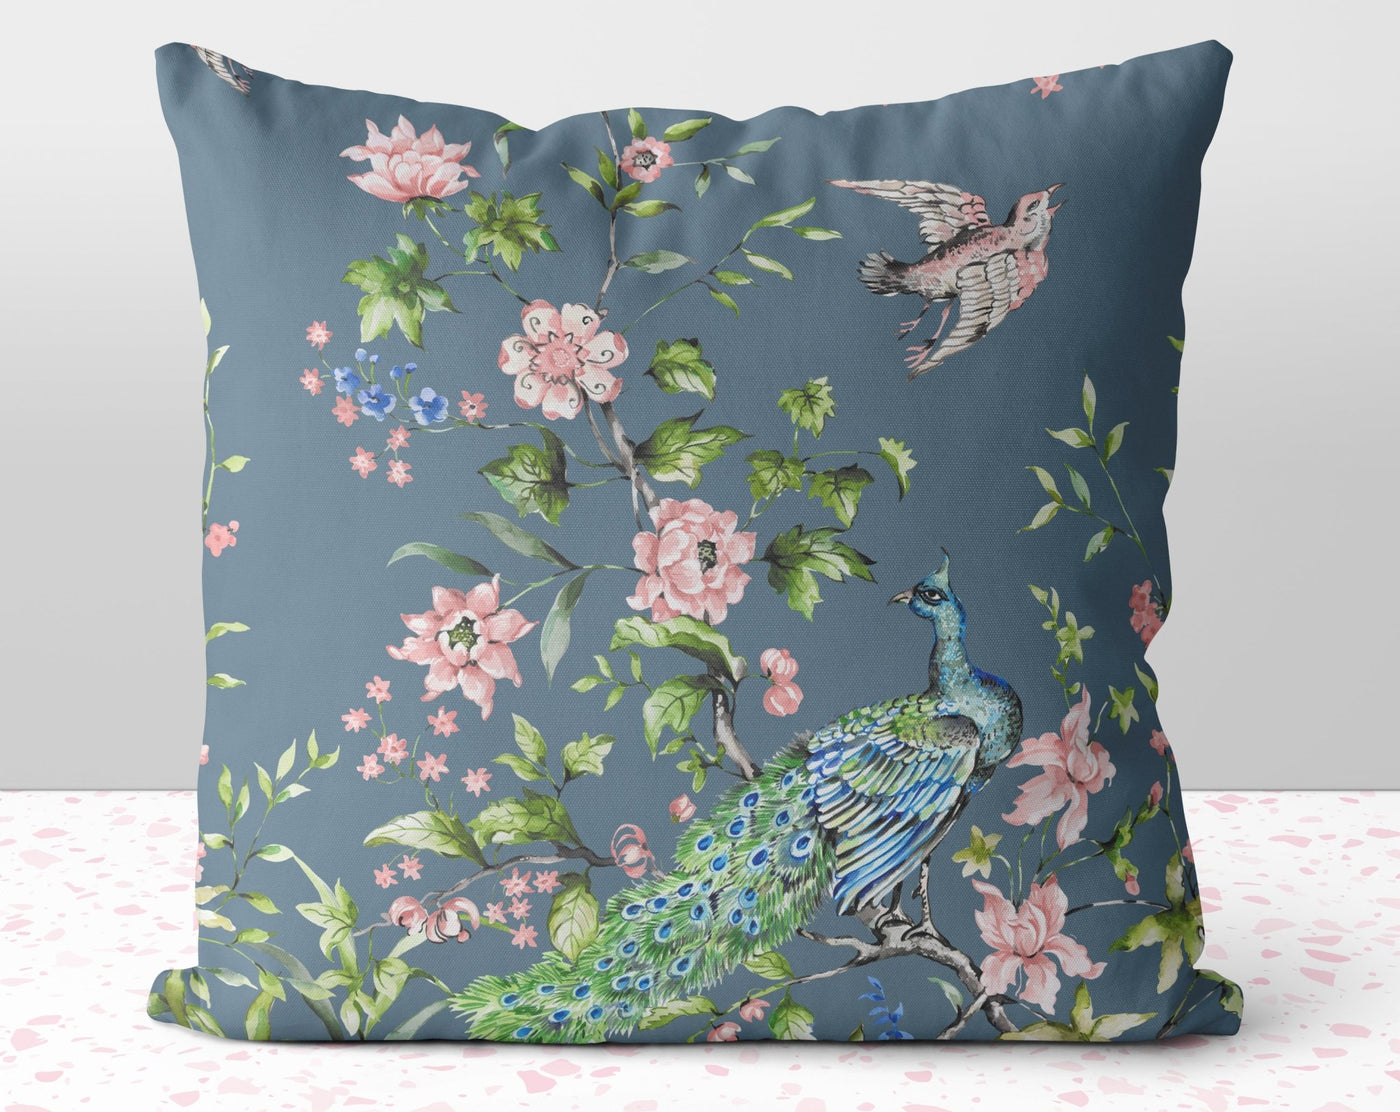 Floral Peacock Chinoiserie Flowers Pink on Gray Square Pillow with Cover Throw with Insert - Cush Potato Pillows